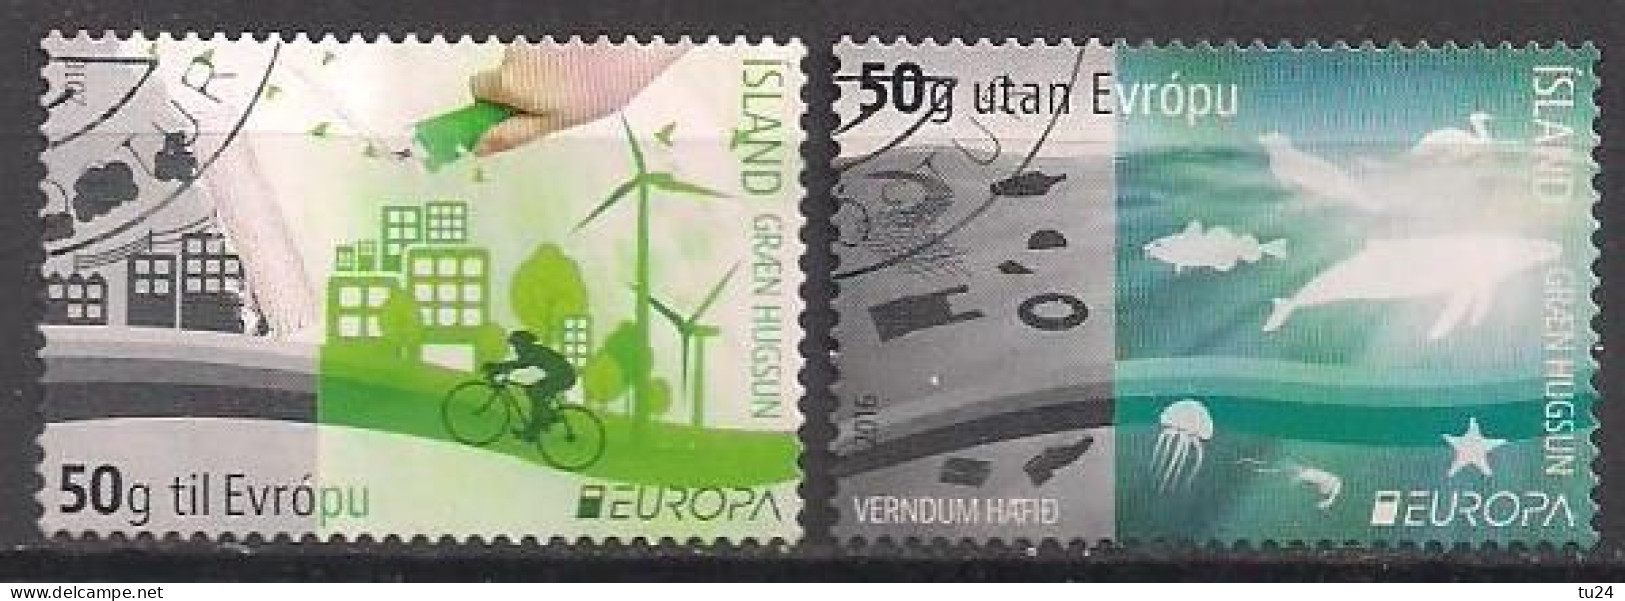 Island  (2016)  Mi.Nr.  1495 + 1496  Gest. / Used  (4he06)  EUROPA / MH / From Booklet - Oblitérés